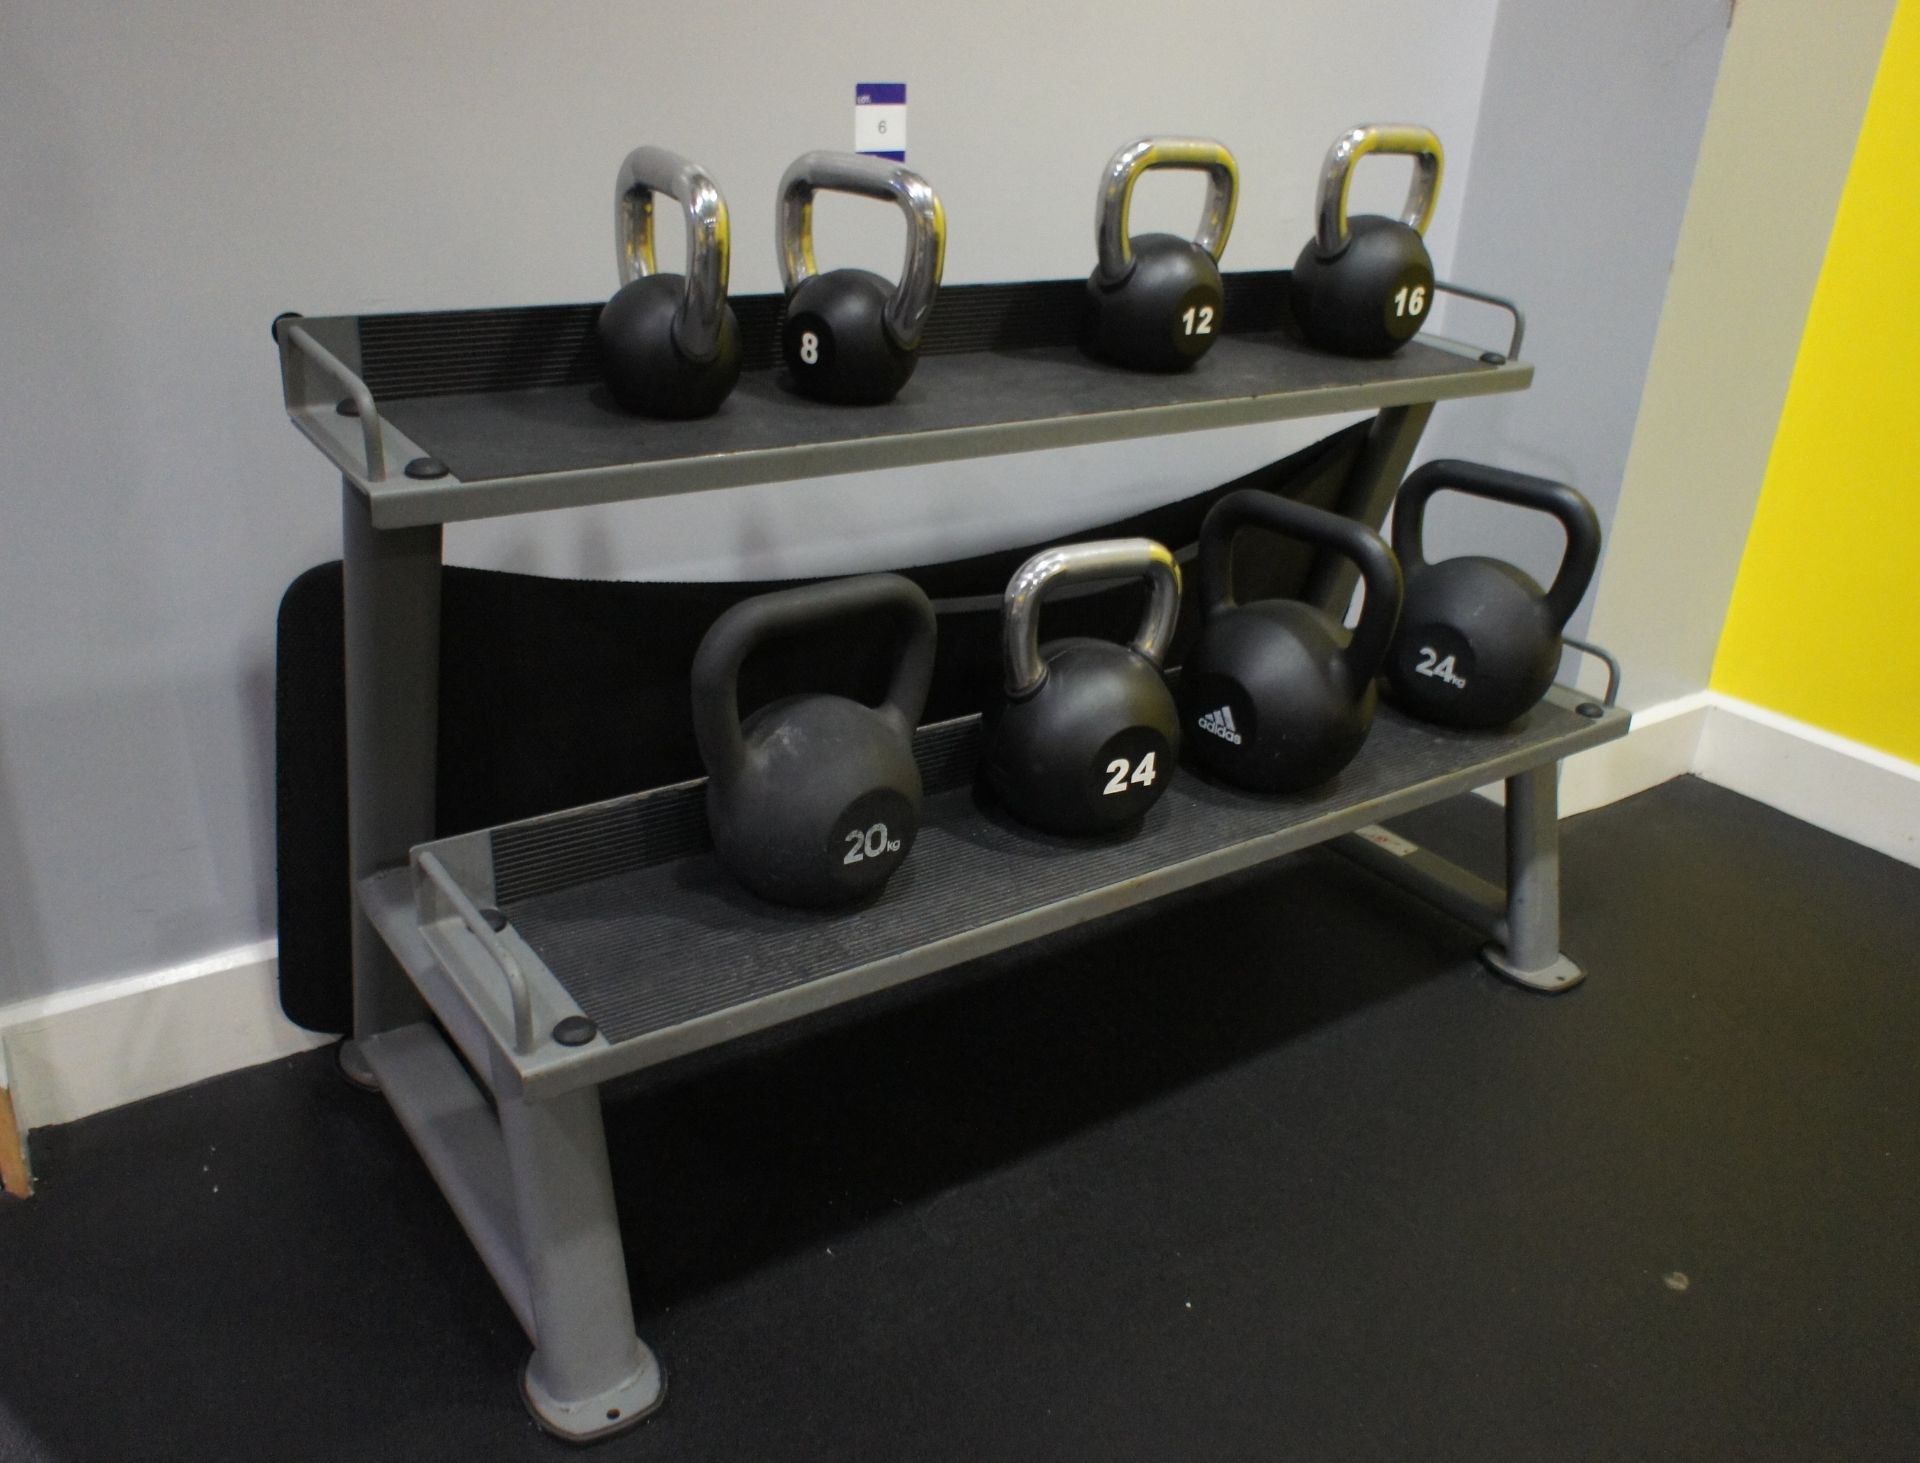 Kettle Bell Rack with 8 Various Kettle Bell Weights